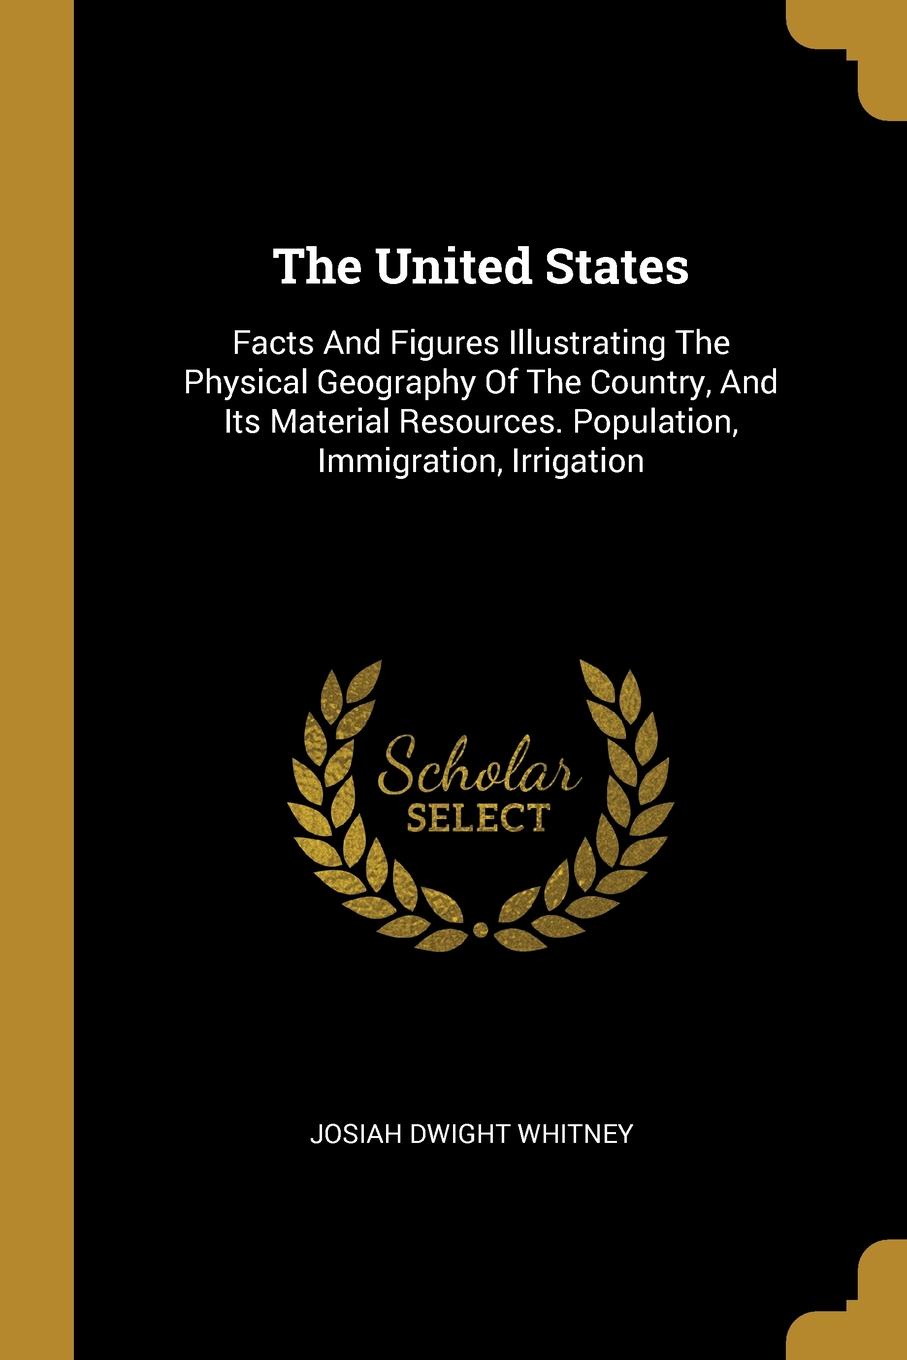 The United States. Facts And Figures Illustrating The Physical Geography Of The Country, And Its Material Resources. Population, Immigration, Irrigation